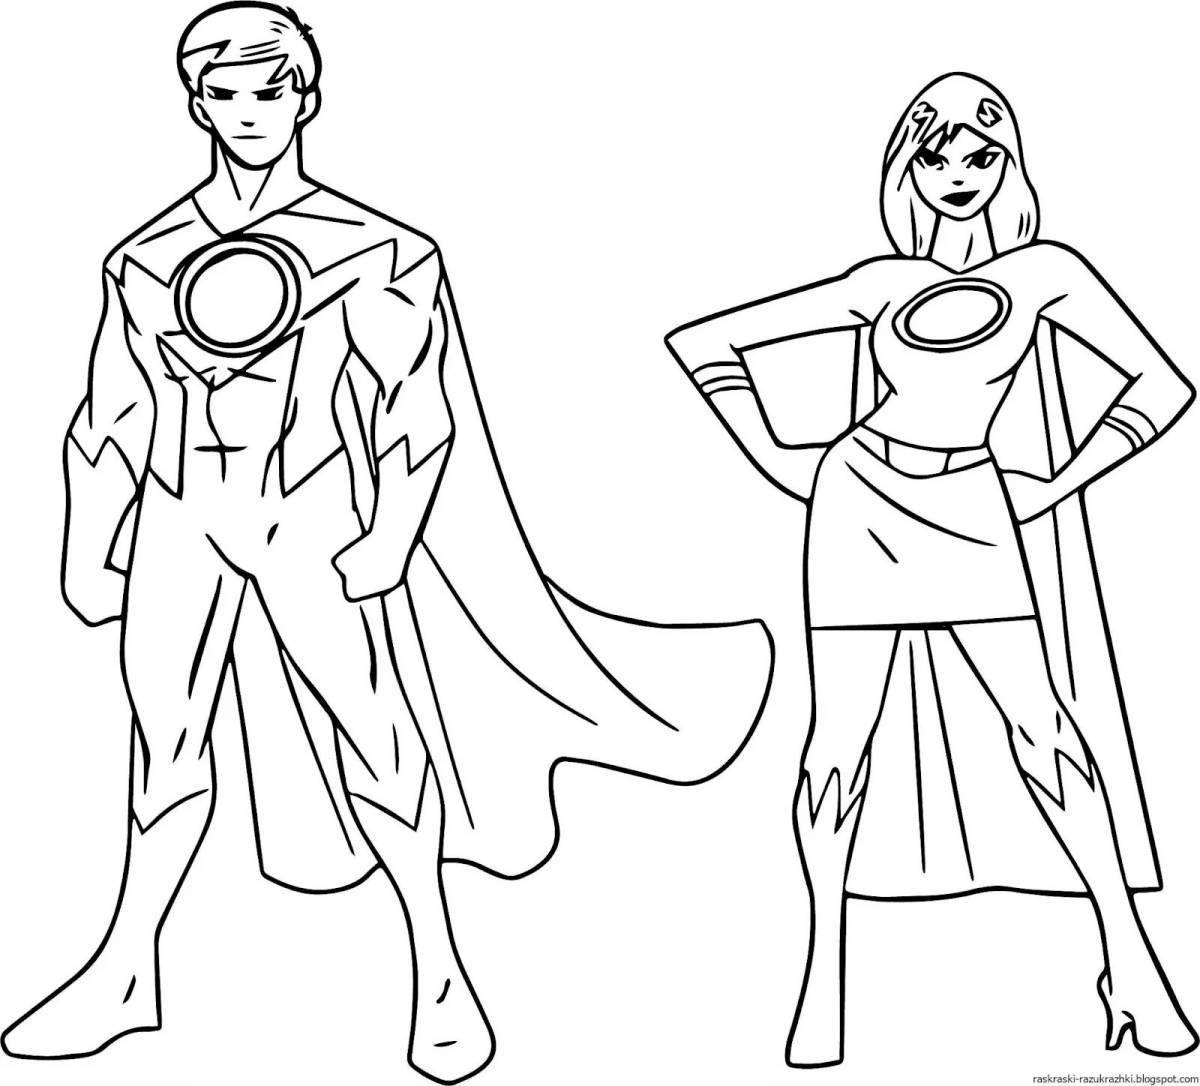 Incredible superhero coloring pages for kids 5-6 years old